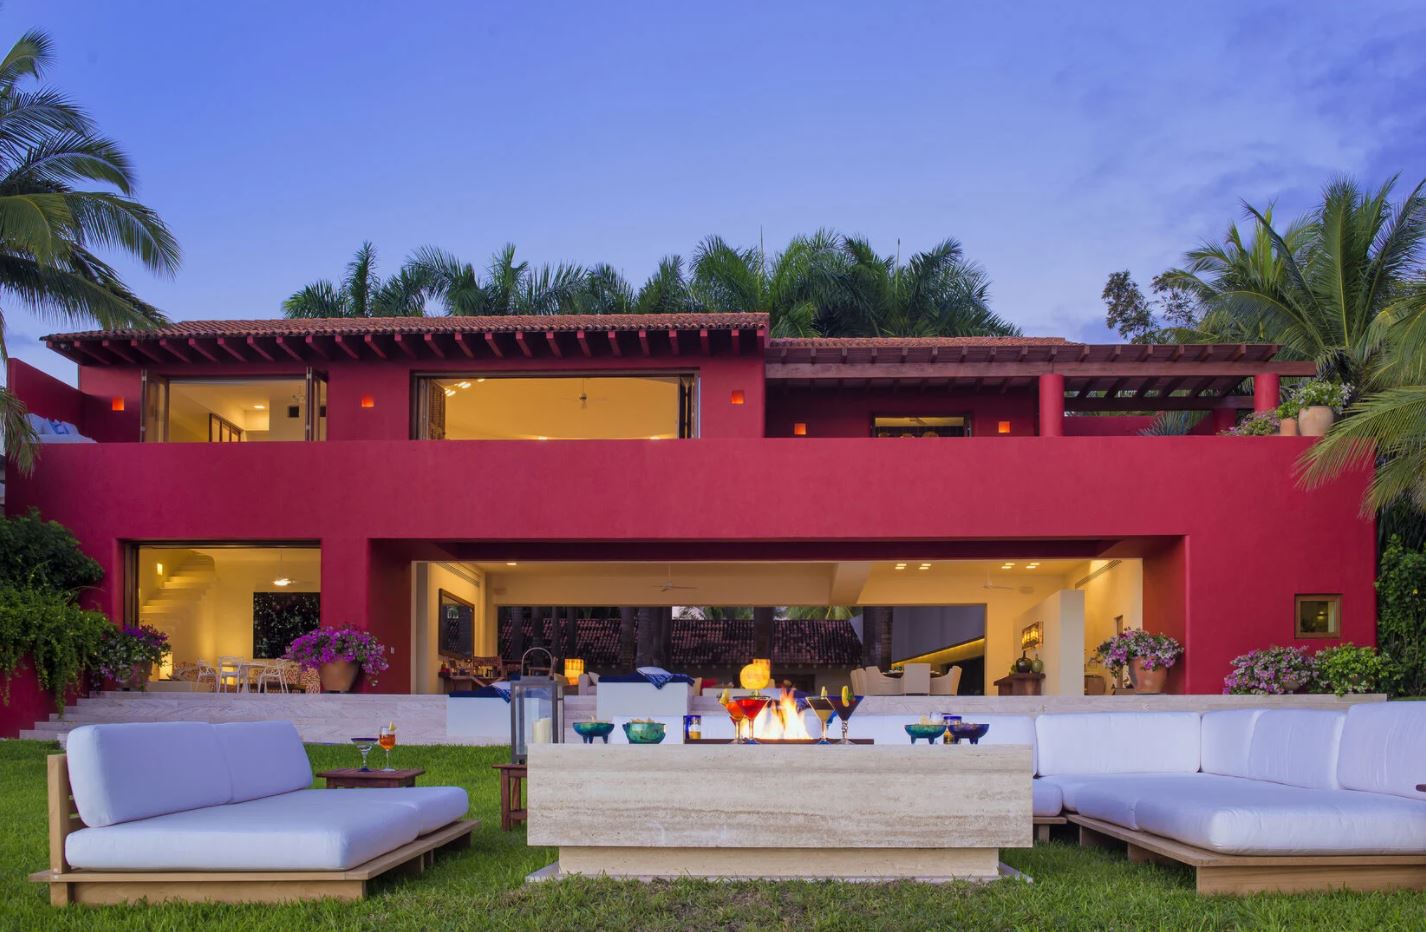 External view of our red Punta De Mita Vacation Homes